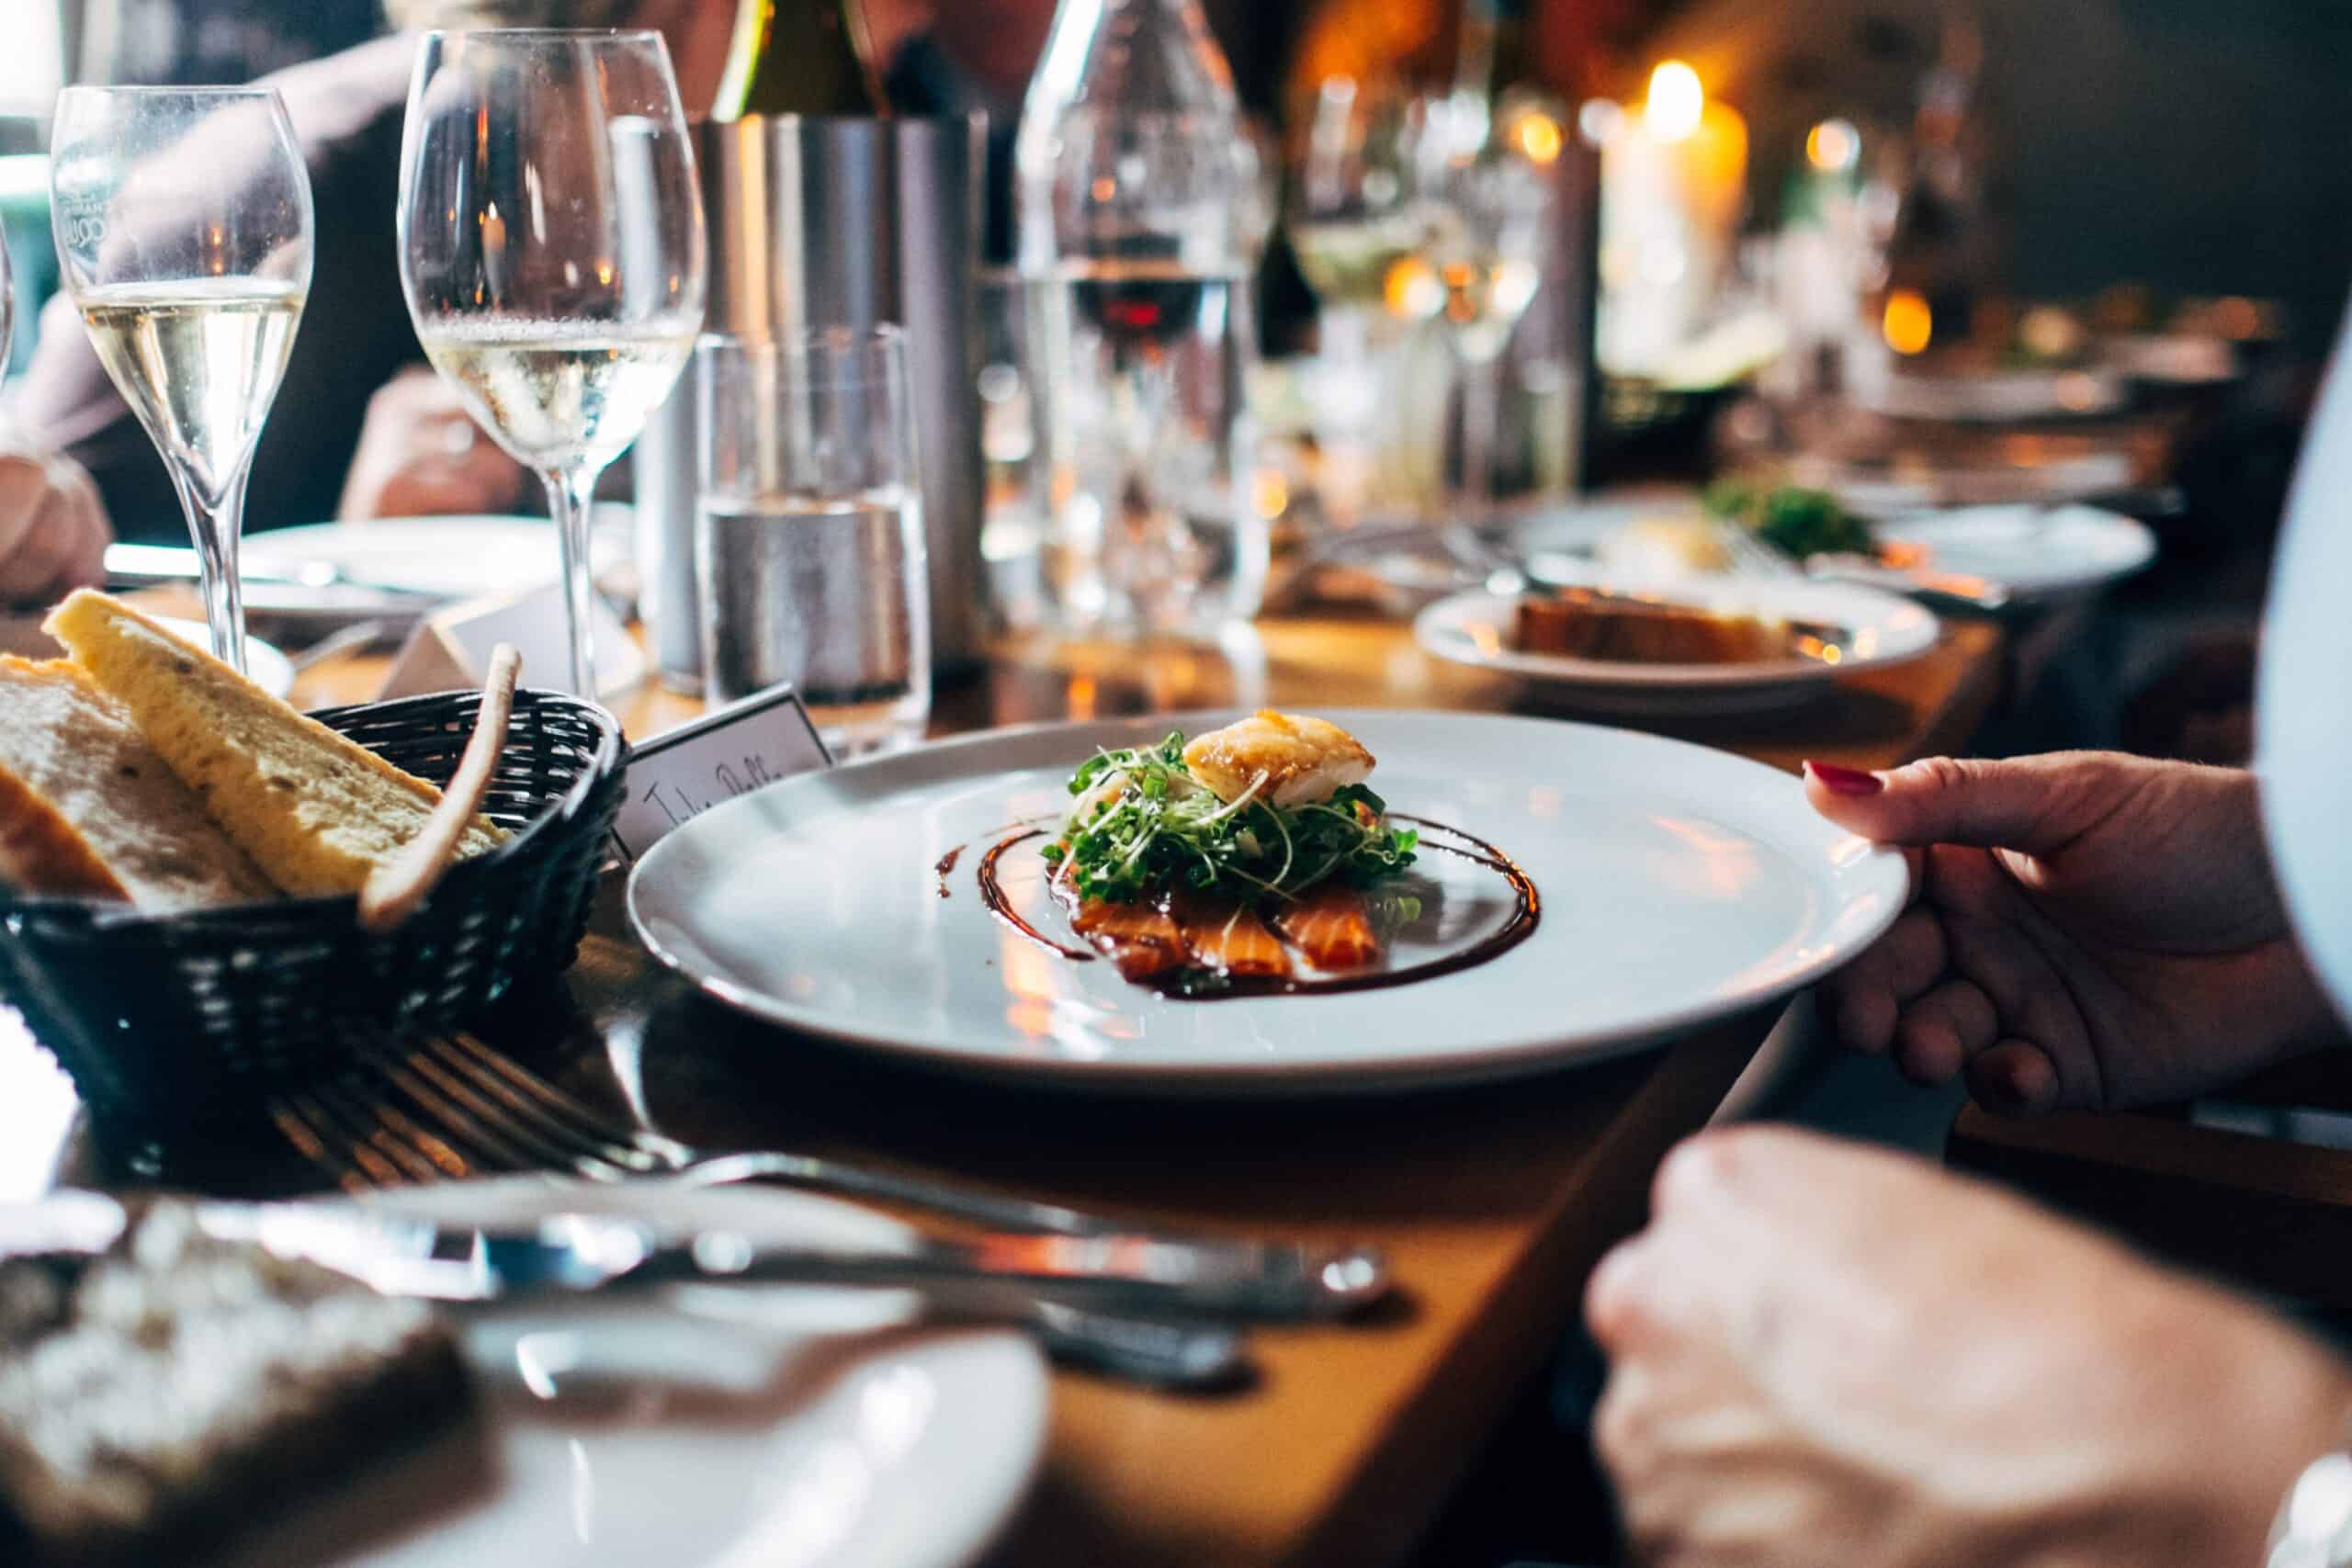 10 ways to attract more guests to your restaurant